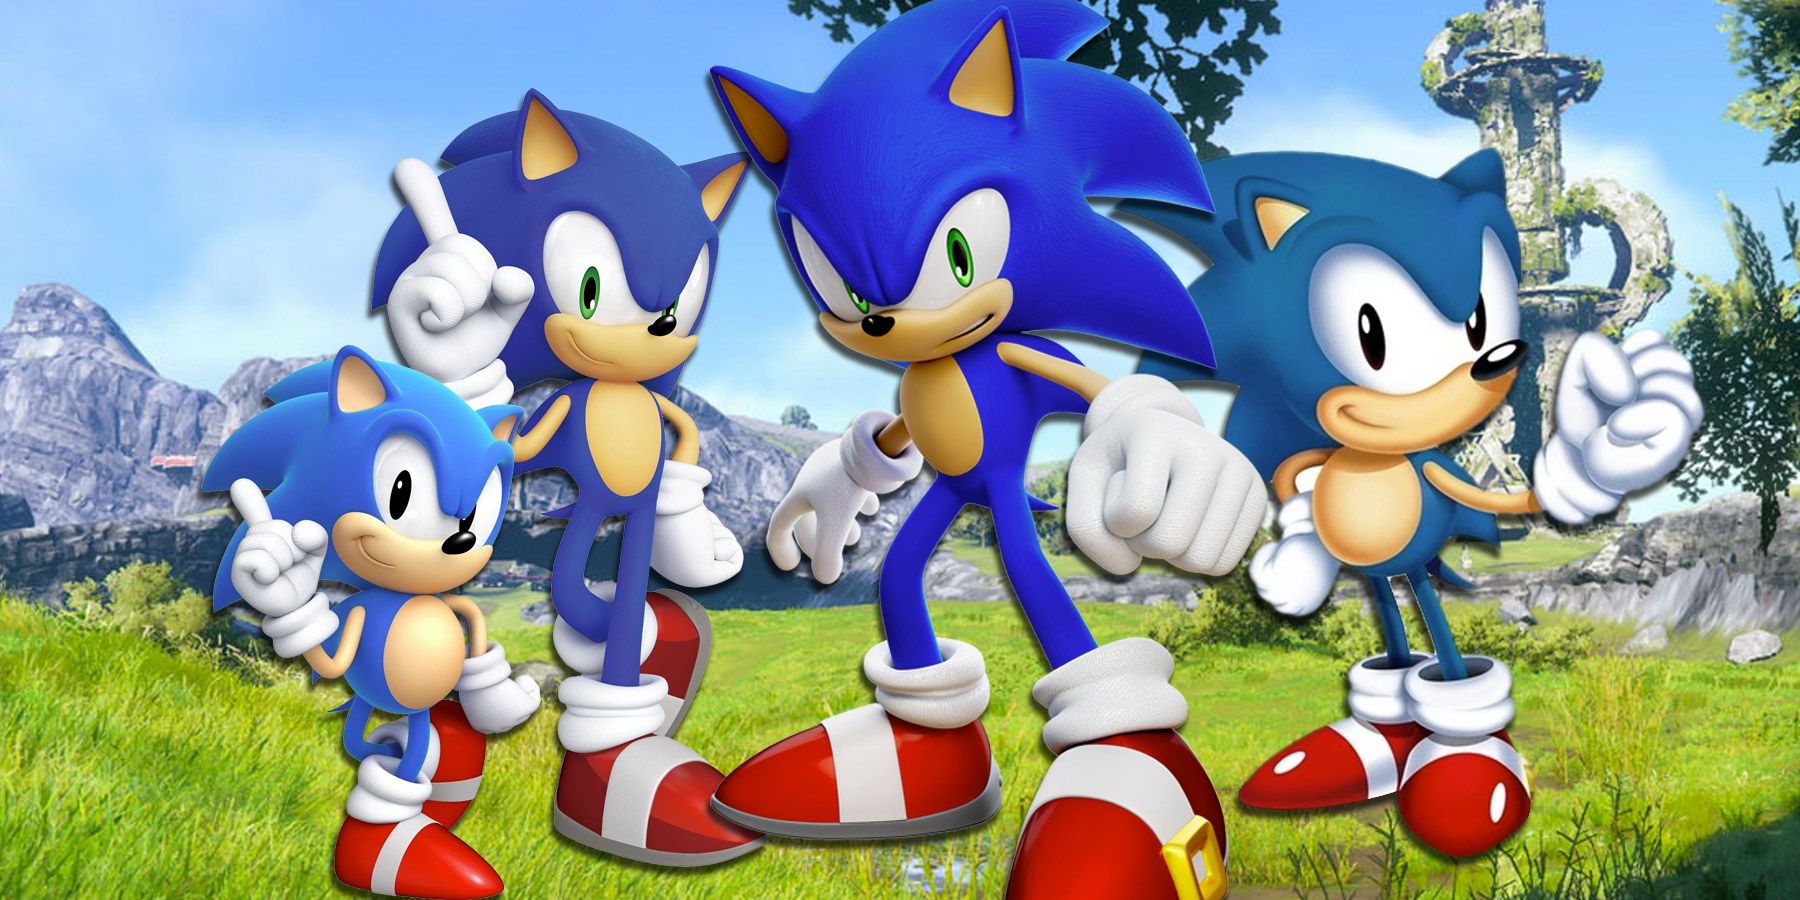 We can look forward to more 2D Sonic games, says Sonic Frontiers